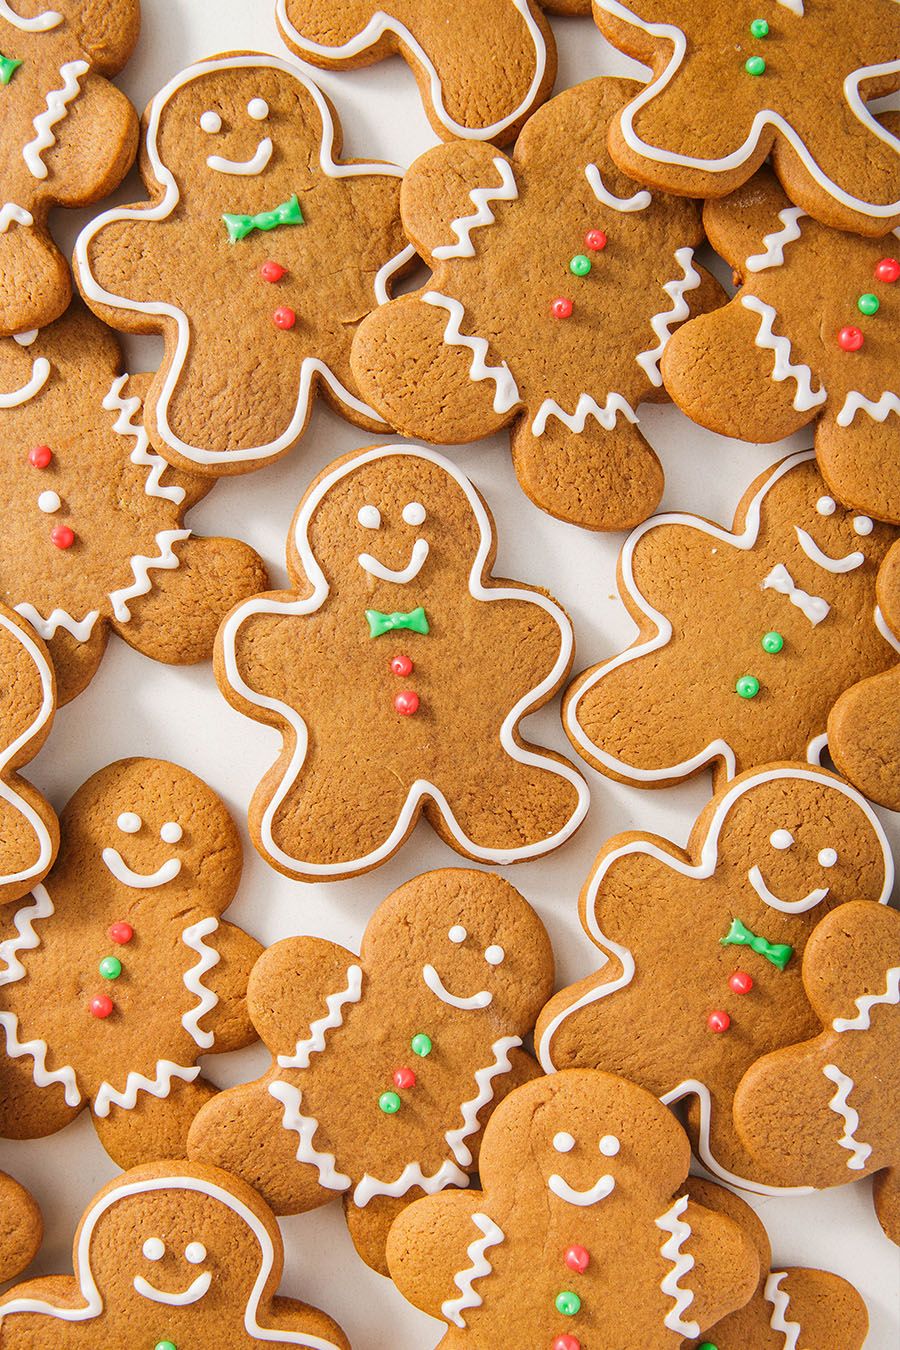 The 10 Best Baking Tools for Cookies and Holiday Treats